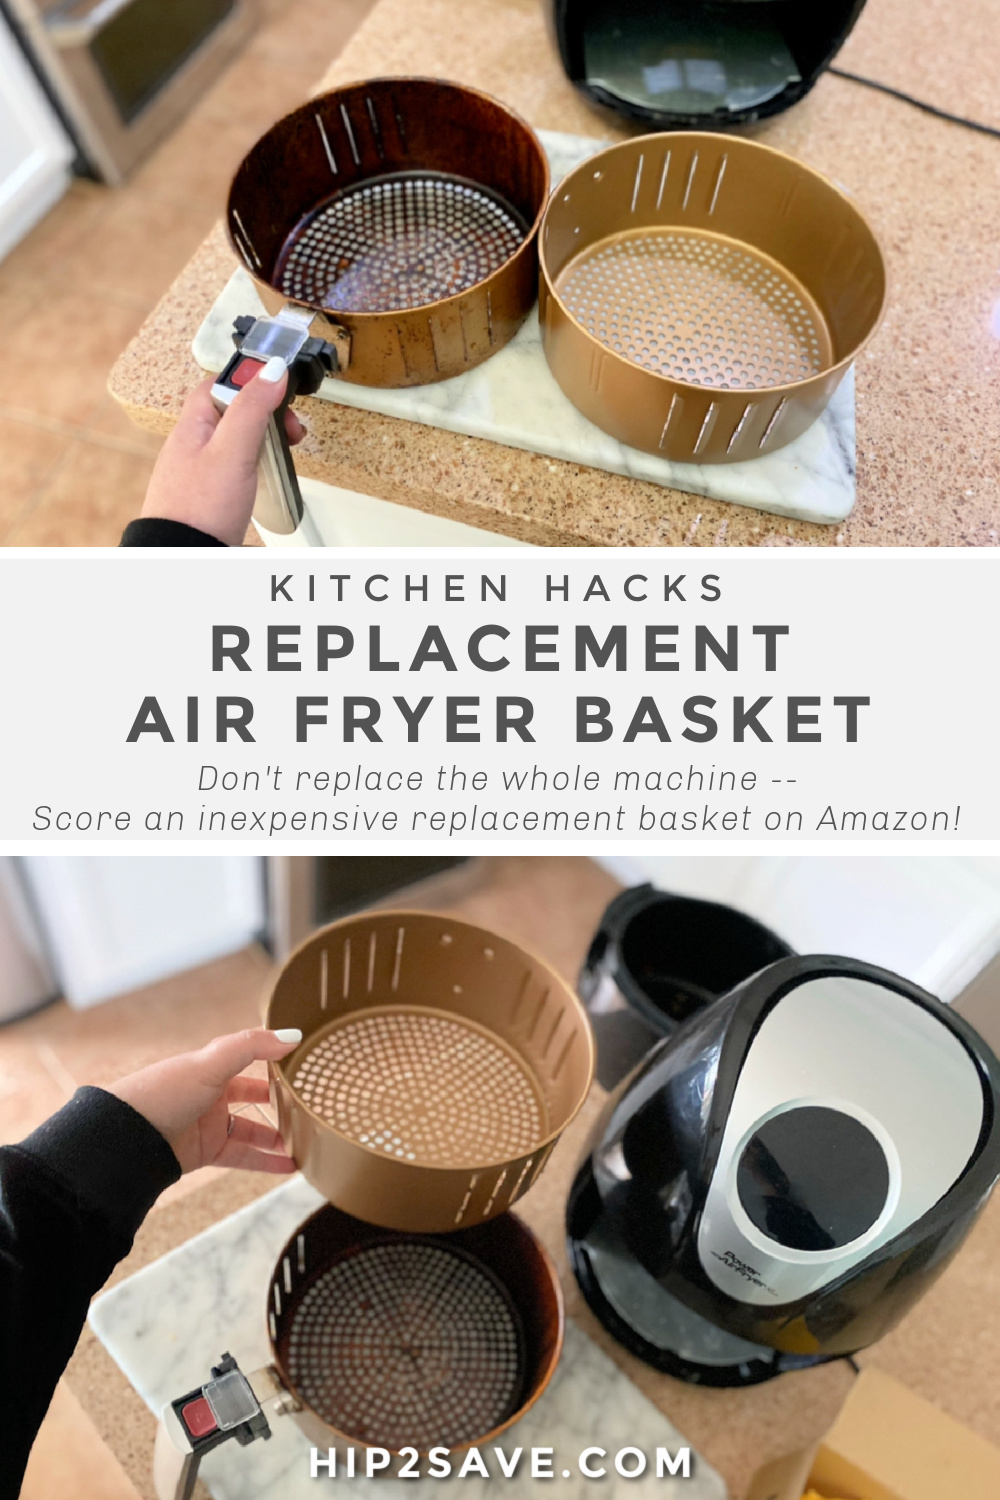 My Replacement Air Fryer Basket is a Game Changer